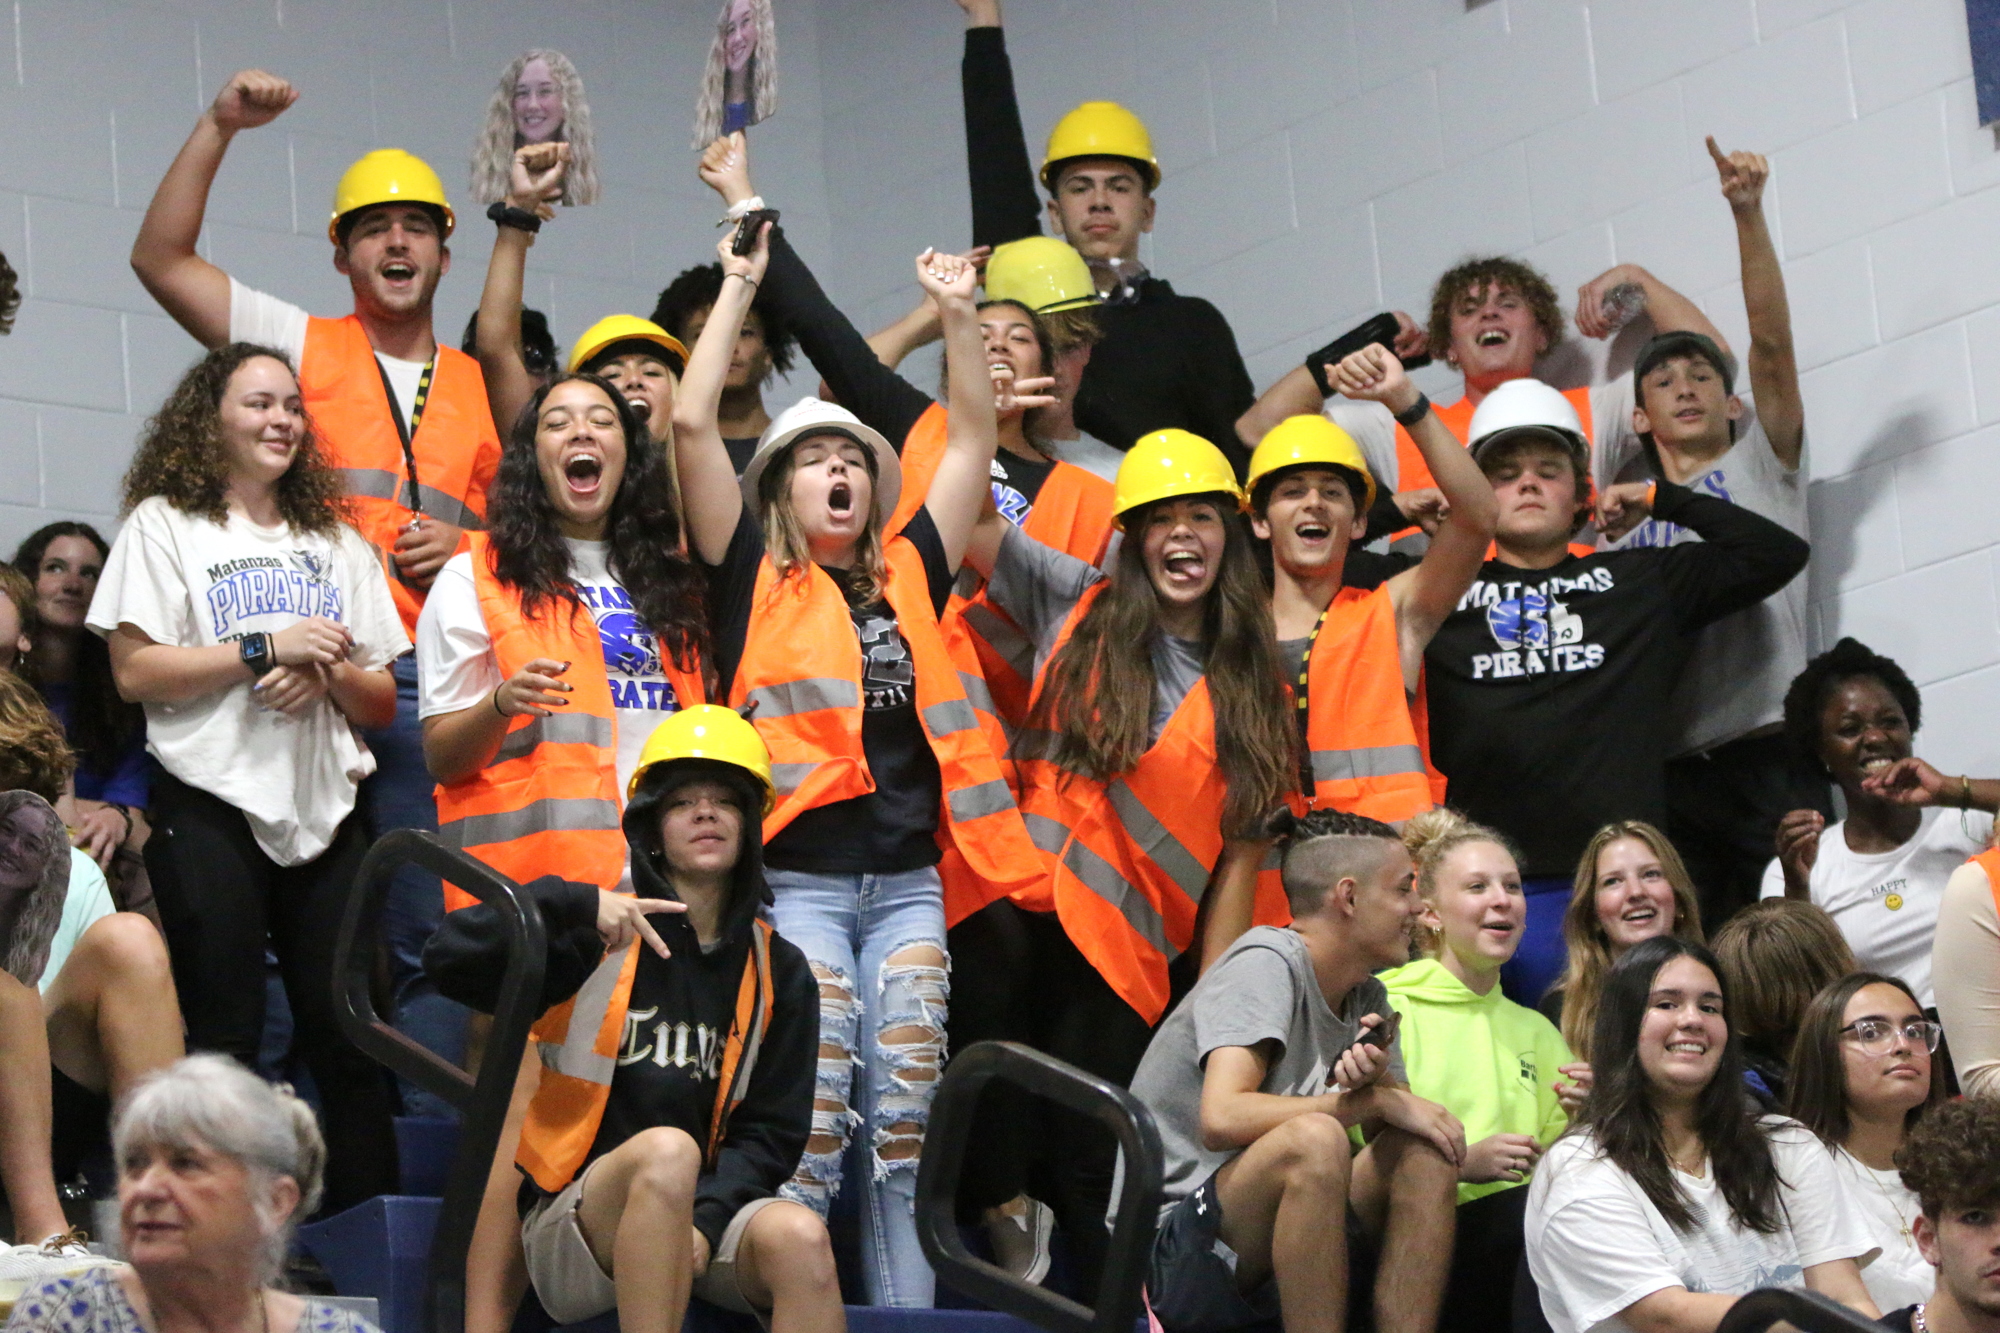 Tate Winecoff helps organize themed student sections at athletic events, such as this construction theme at a volleyball game against FPC. Photo by Brent Woronoff